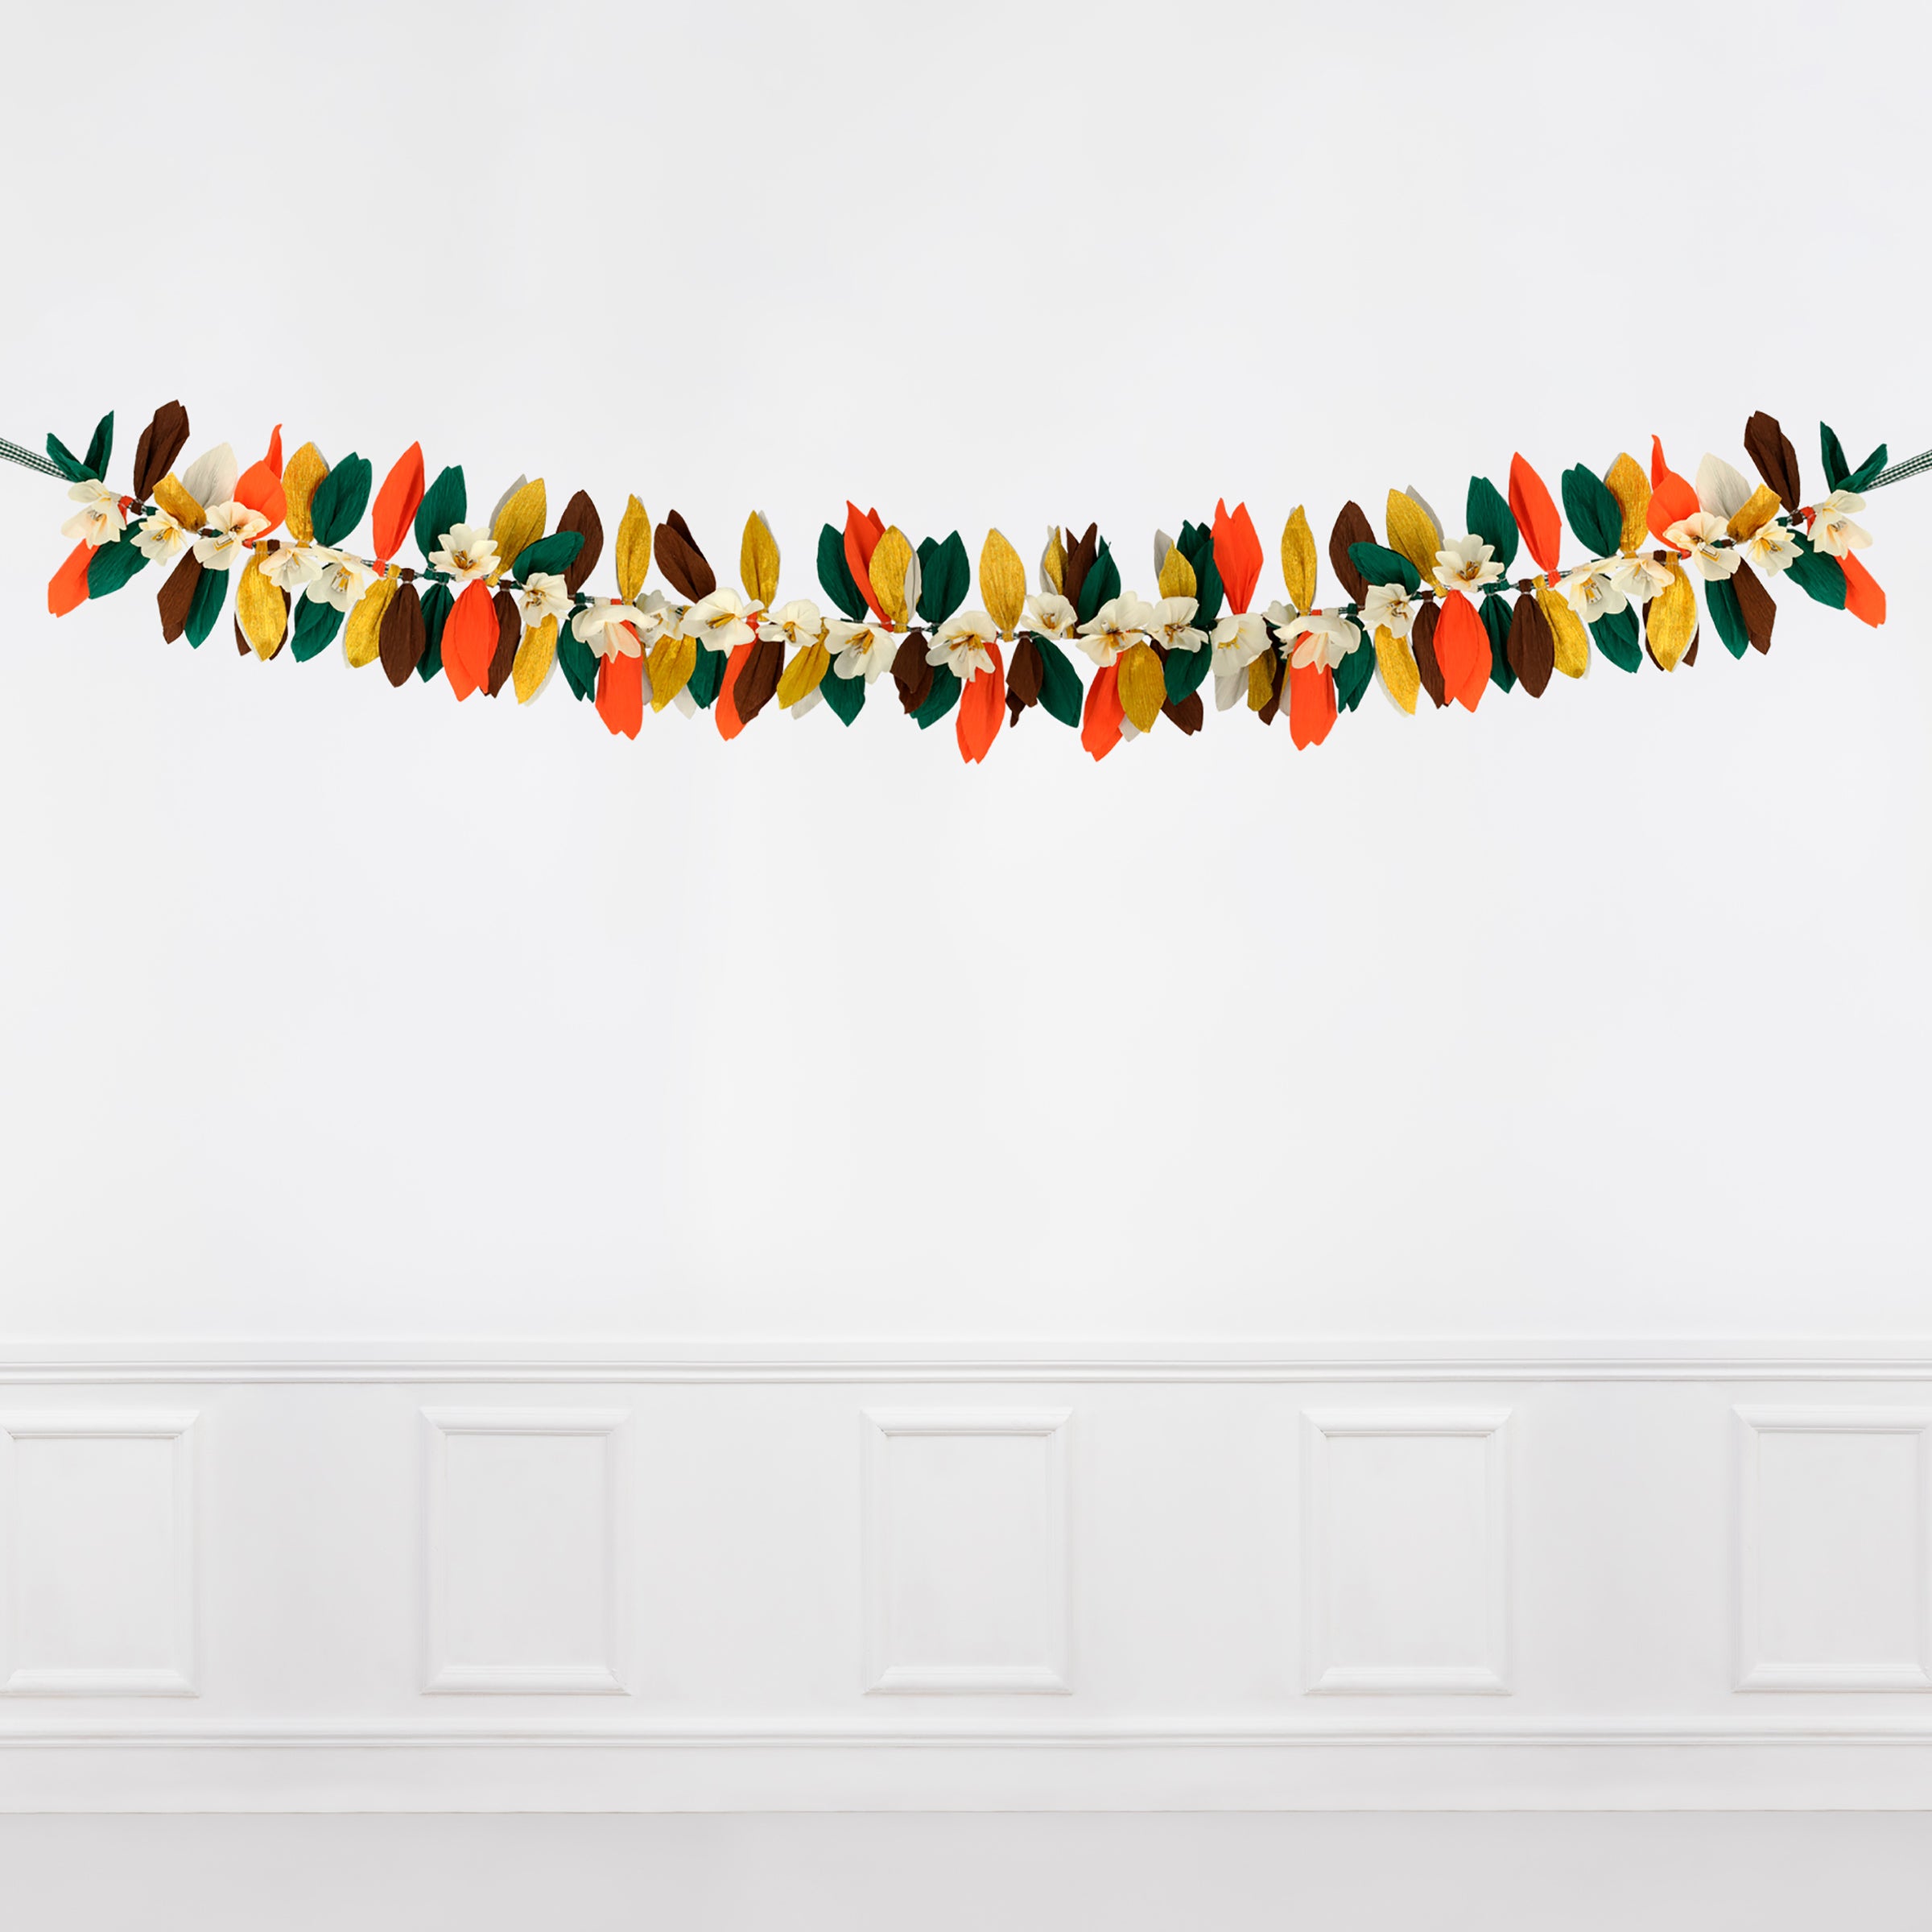 This paper flower garland, with paper leaves, makes a stunning Thanksgiving decoration idea.